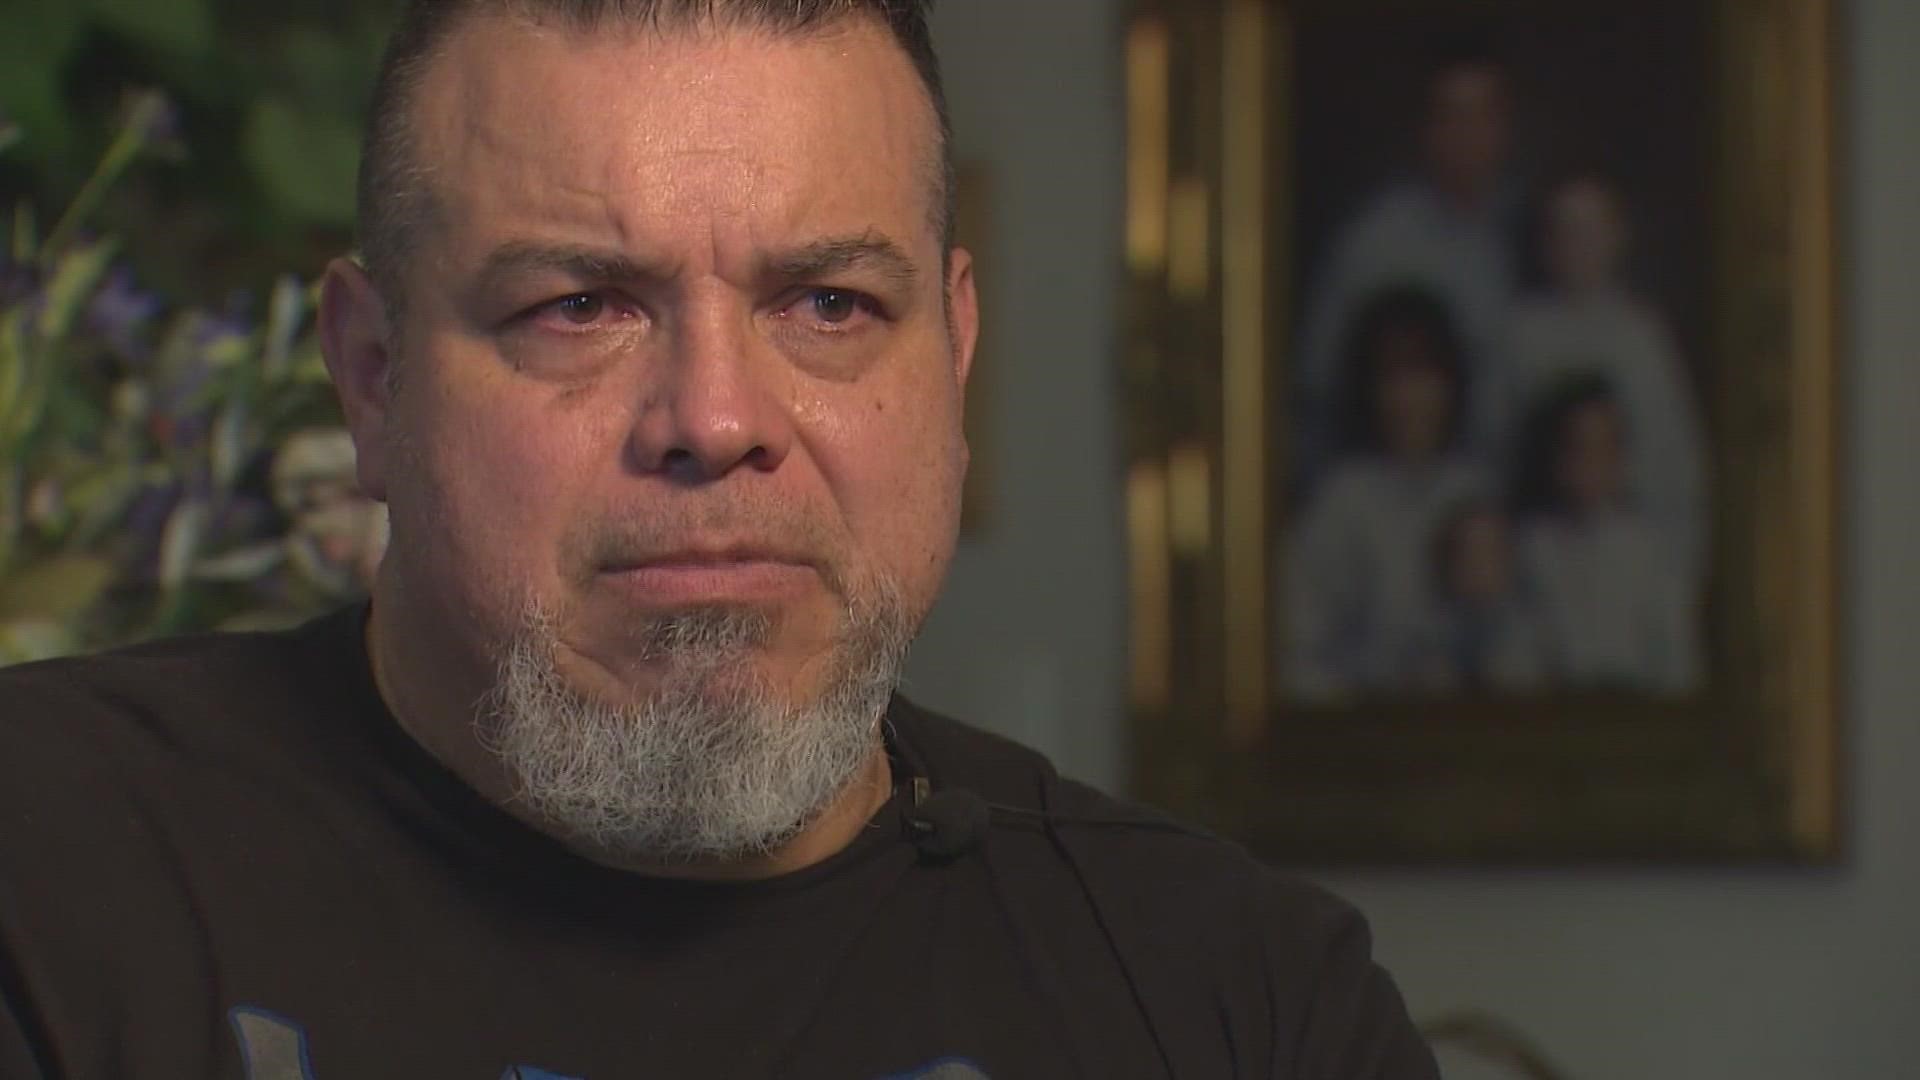 Ronny Cortez was an HPD officer when he was shot in 2017. The news about officers Bill Jeffrey and Michael Vance brought back a lot of emotions for his family.